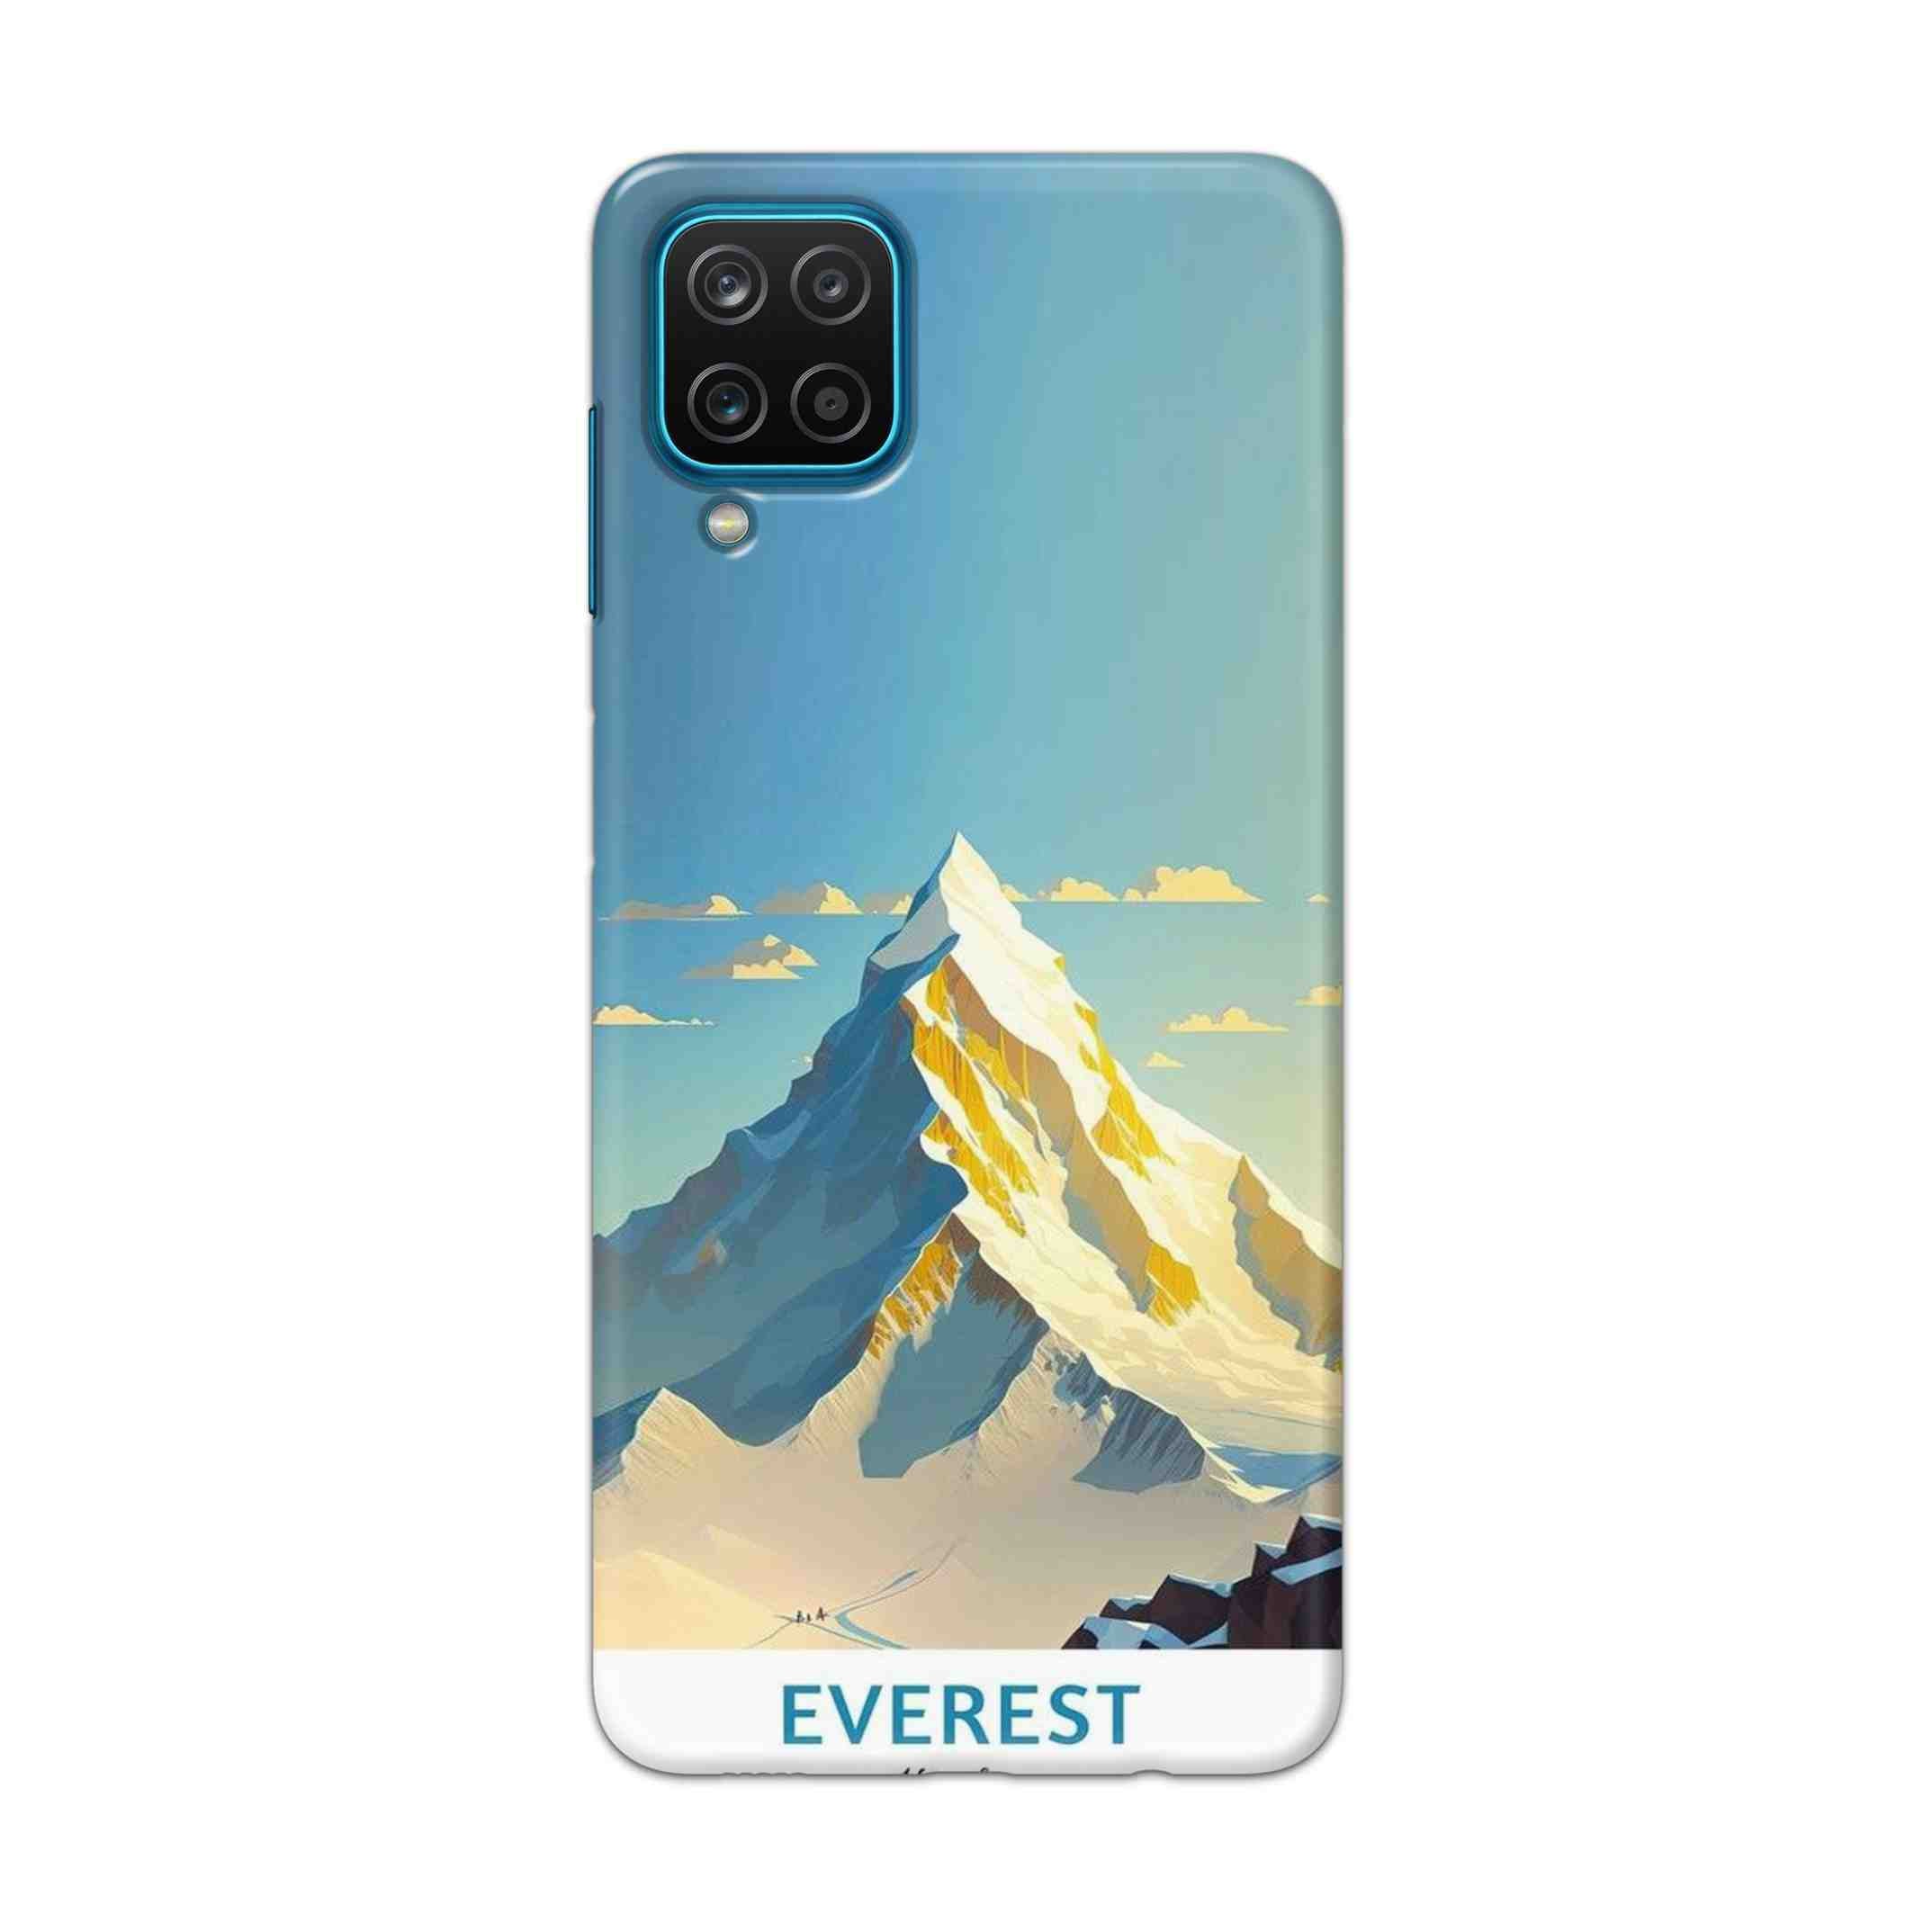 Buy Everest Hard Back Mobile Phone Case Cover For Samsung Galaxy A12 Online